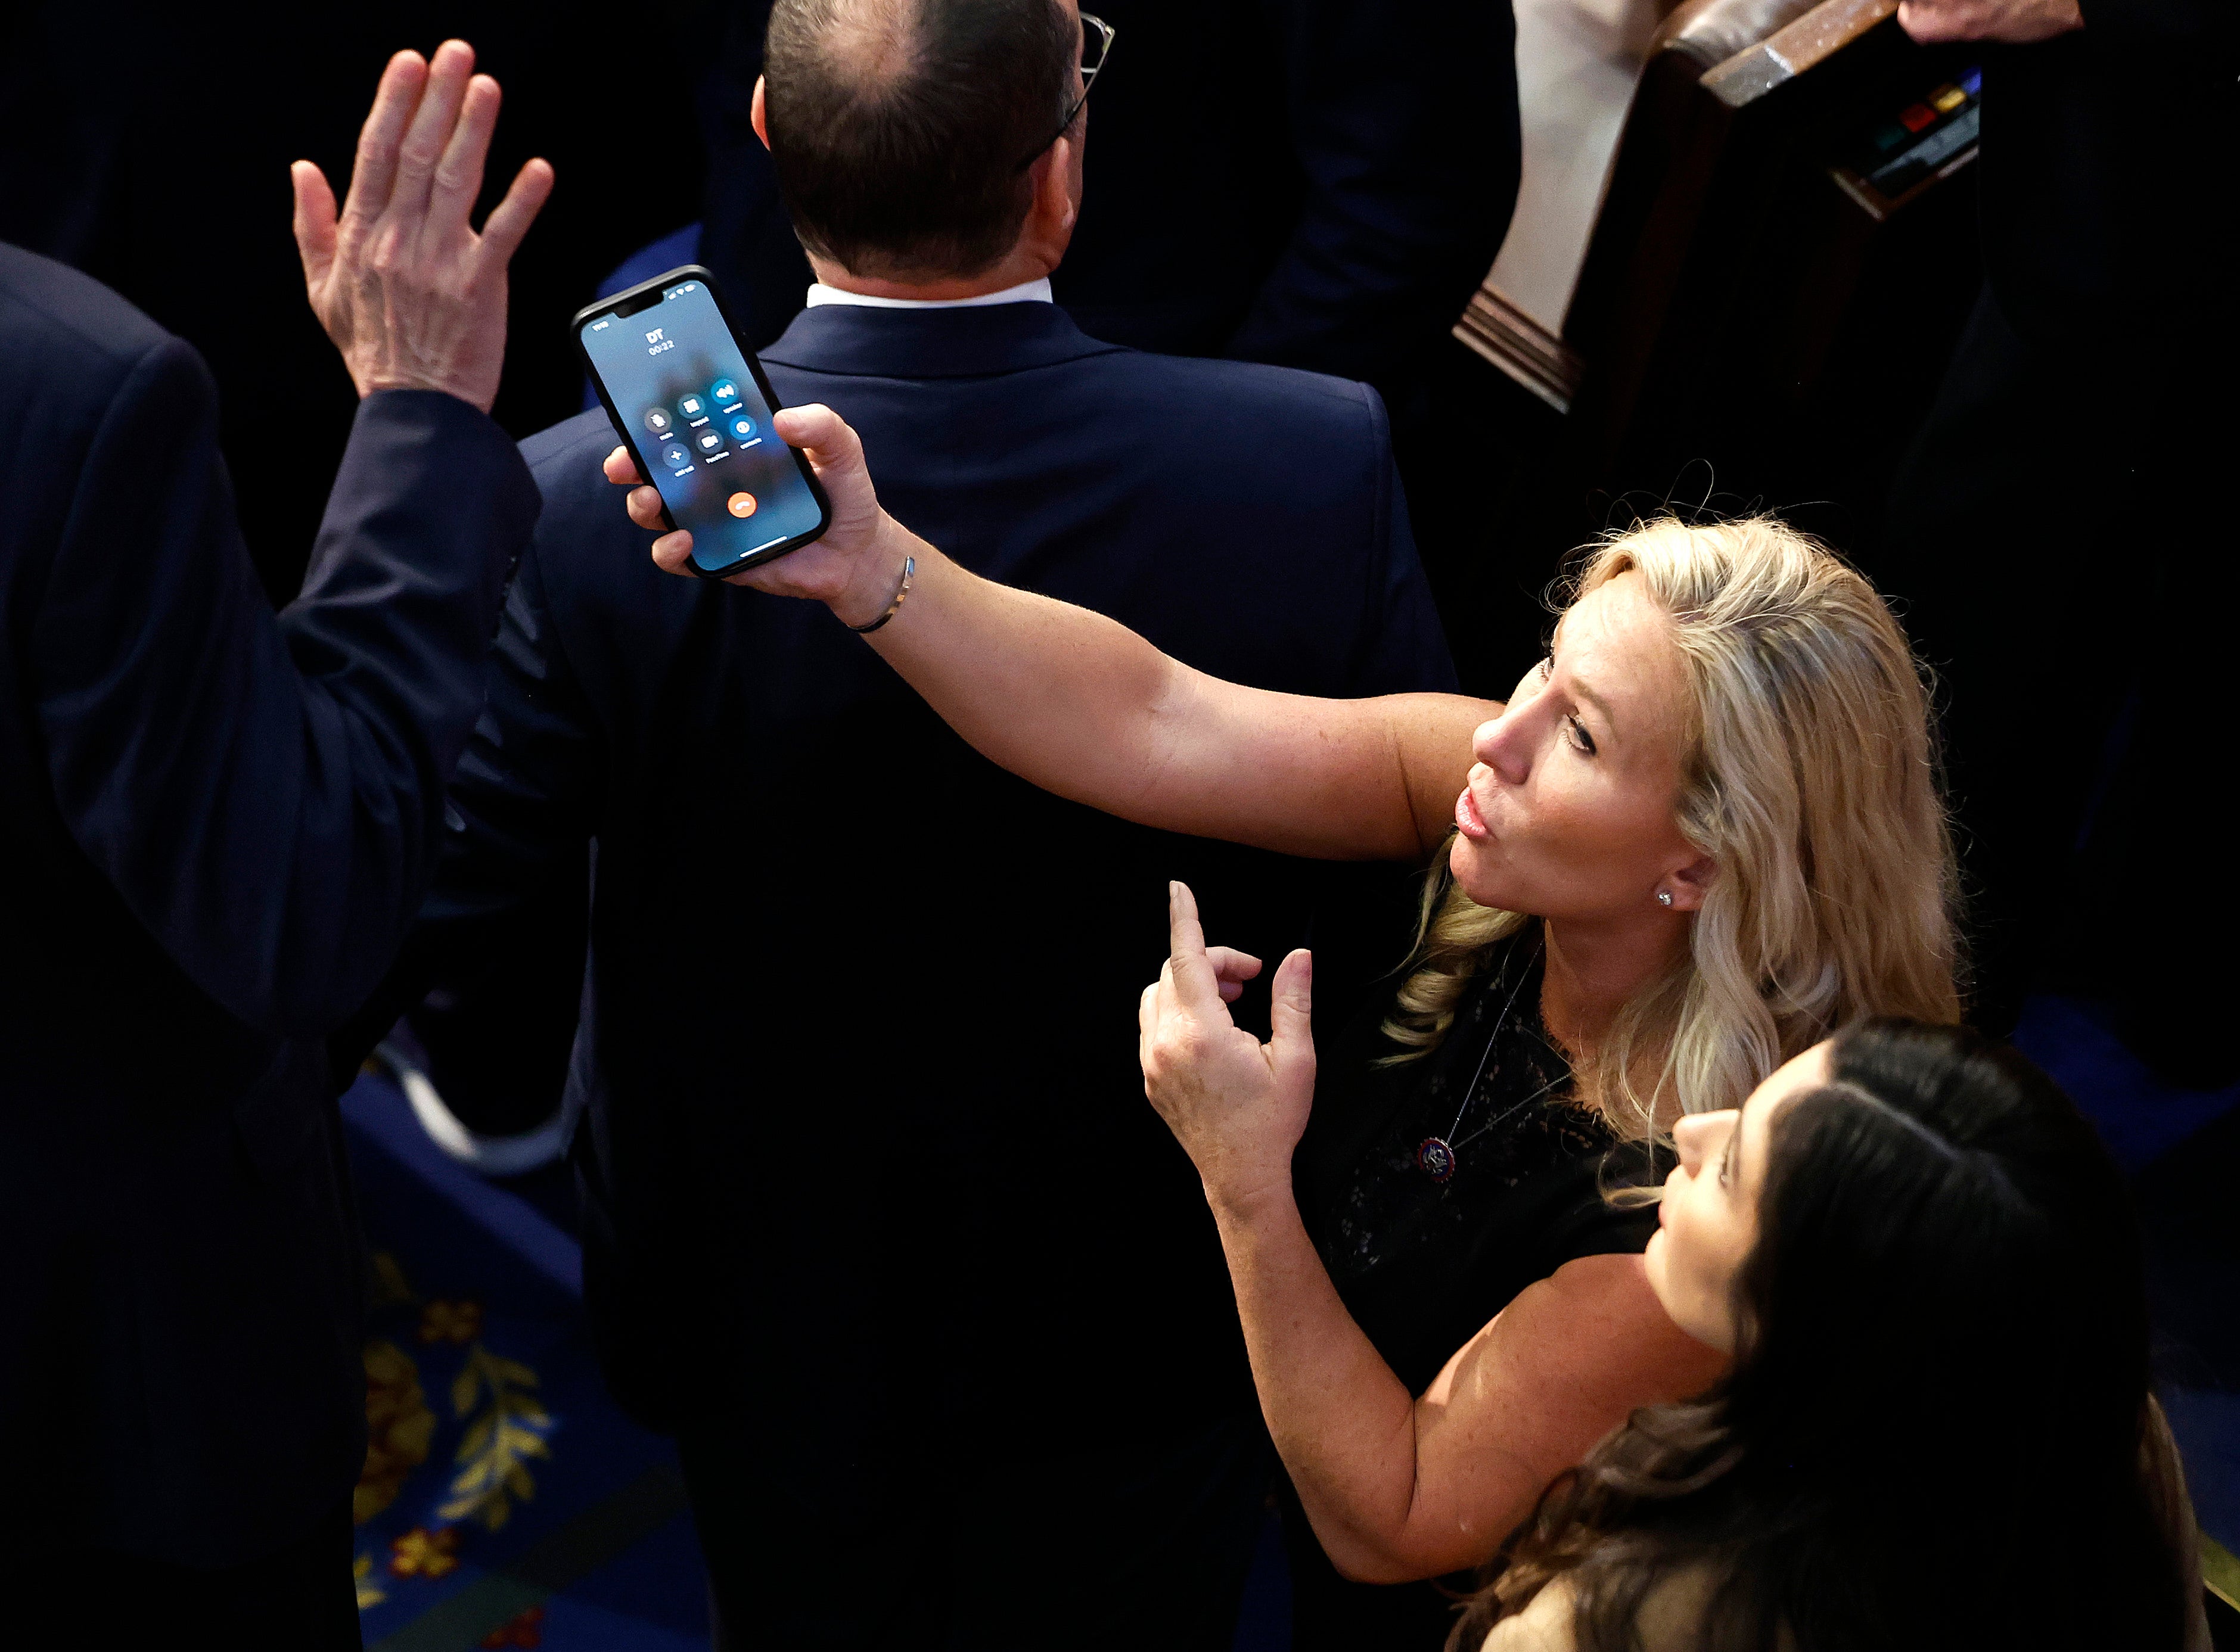 US representative-elect Marjorie Taylor Greene offers a phone to Matt Rosendale in the House Chamber during the fourth day of voting for Speaker of the House at the US Capitol Building on 6 January 2023 in Washington, DC